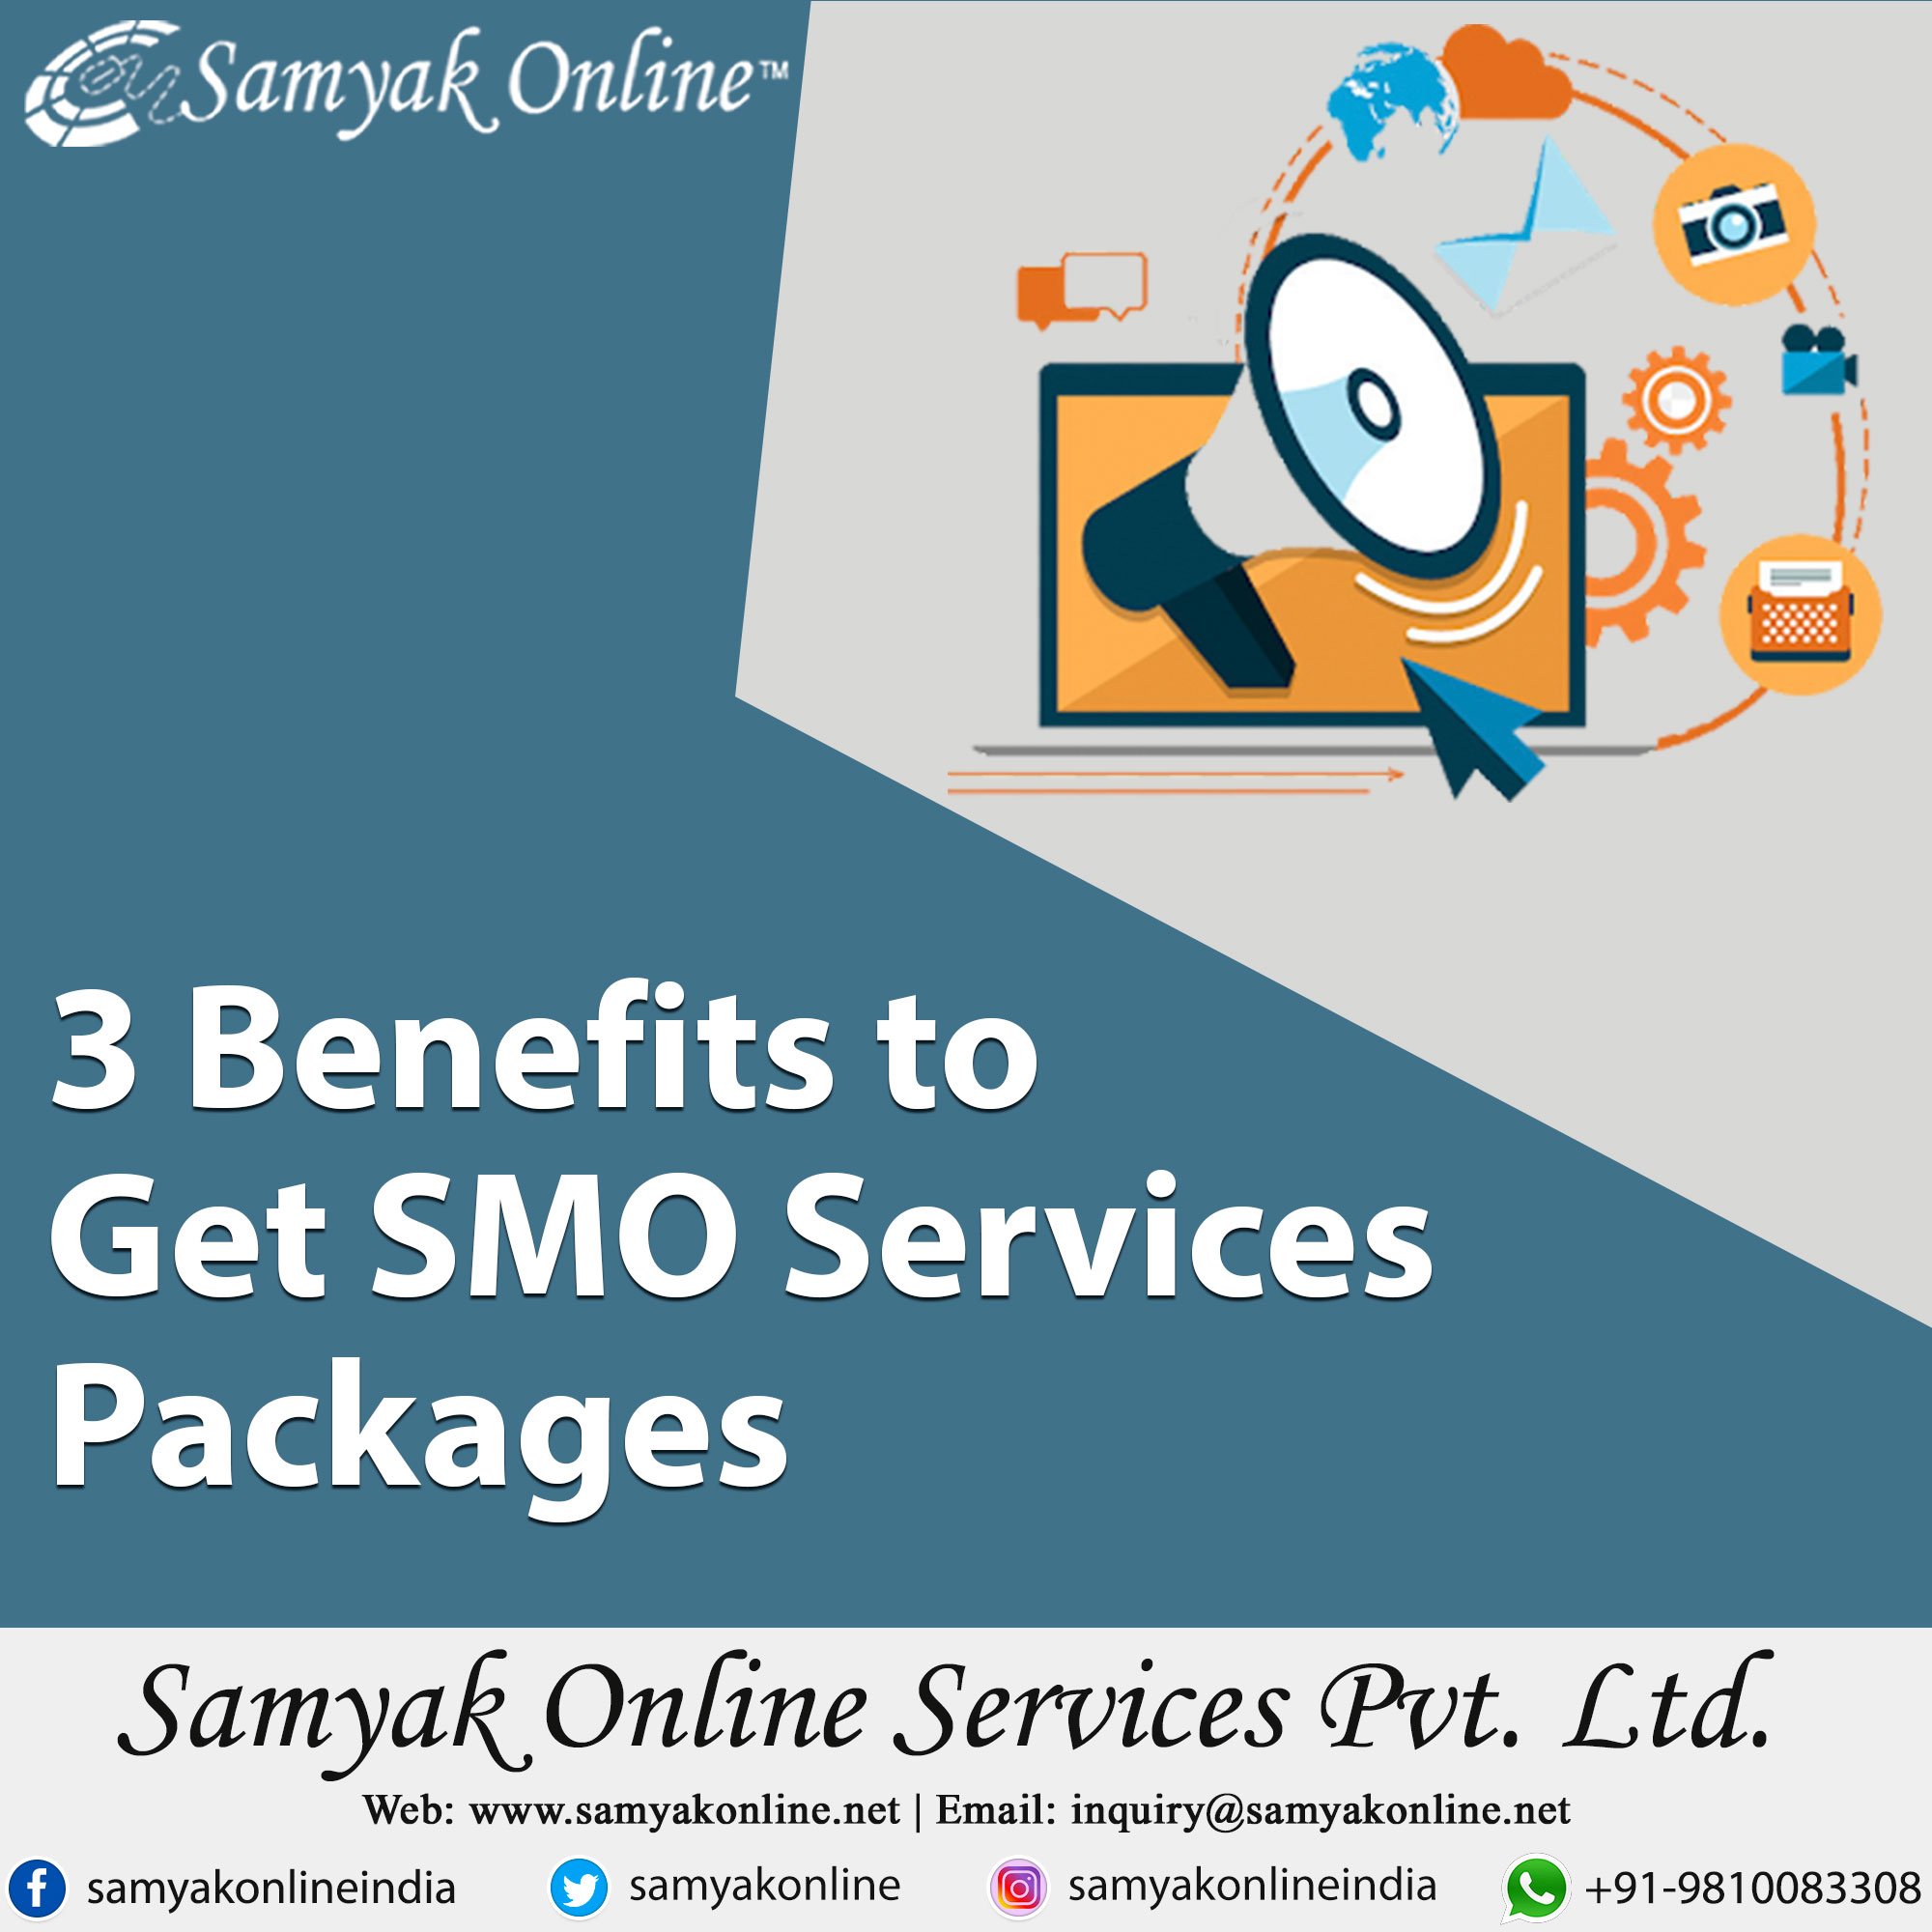 SMO services packages